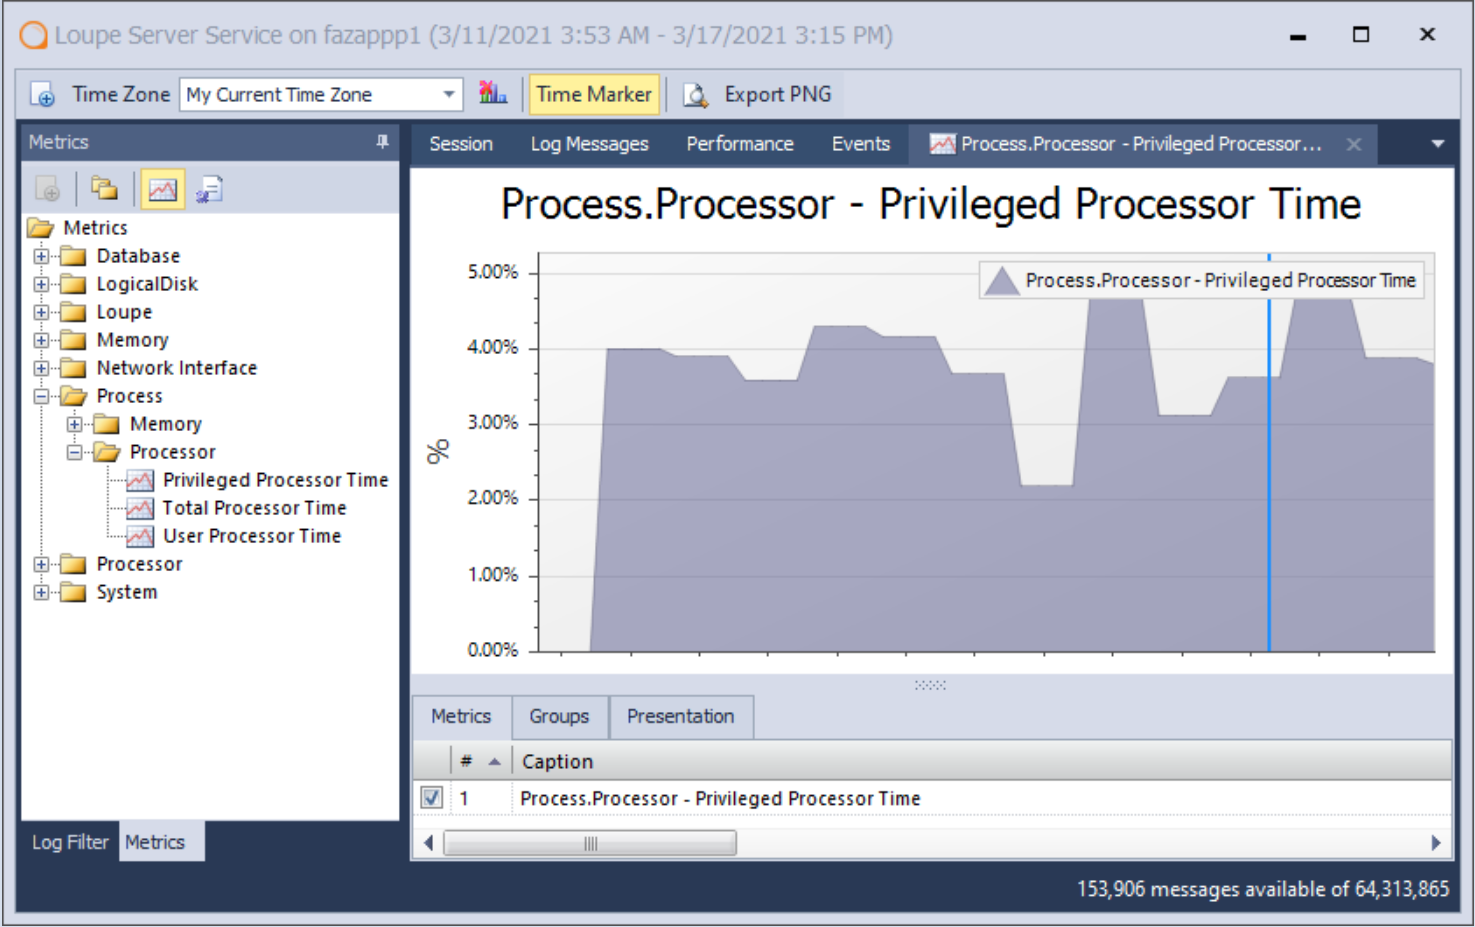 Example graph showing the priviledged processor time for a session in the Loupe Server Service